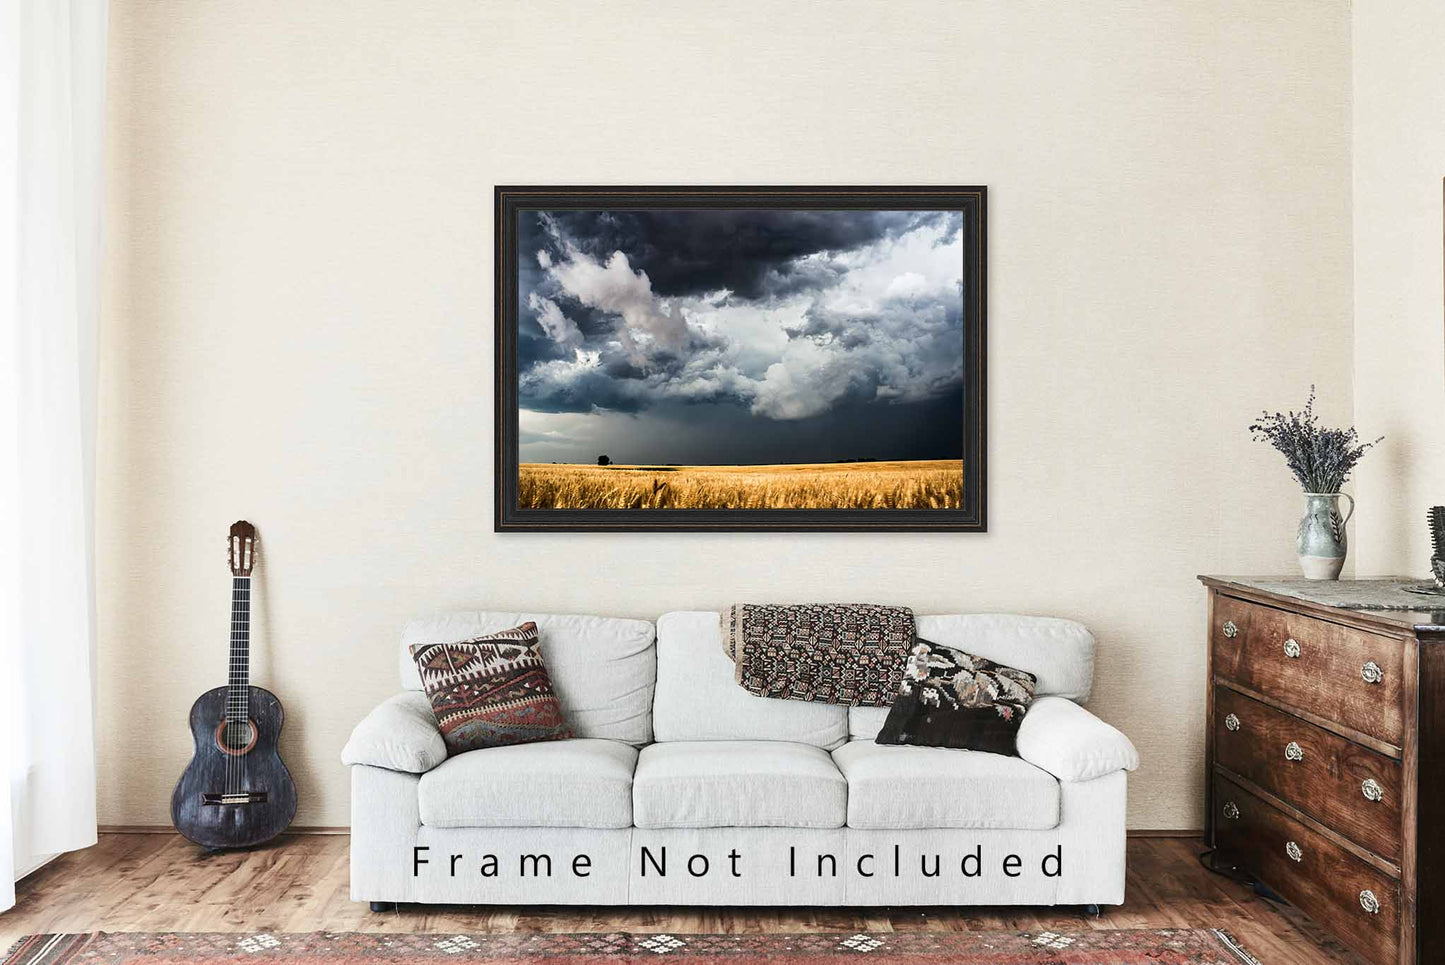 Country Photo Print | Storm Clouds Over Golden Wheat Field Picture | Kansas Wall Art | Landscape Photography | Farmhouse Decor